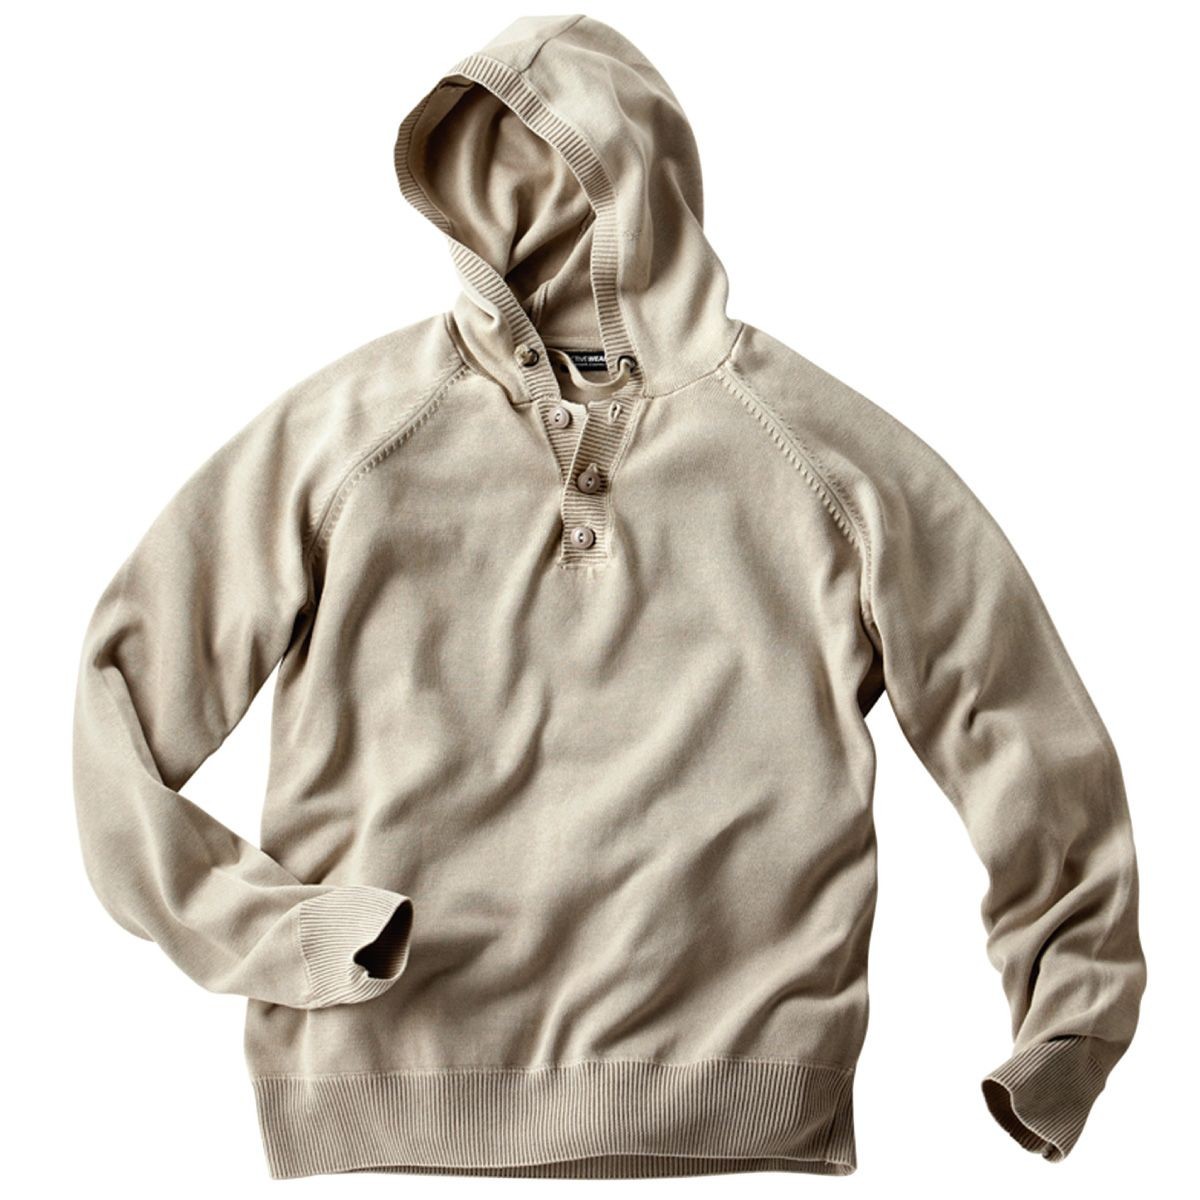 Hoody 100% washed cotton